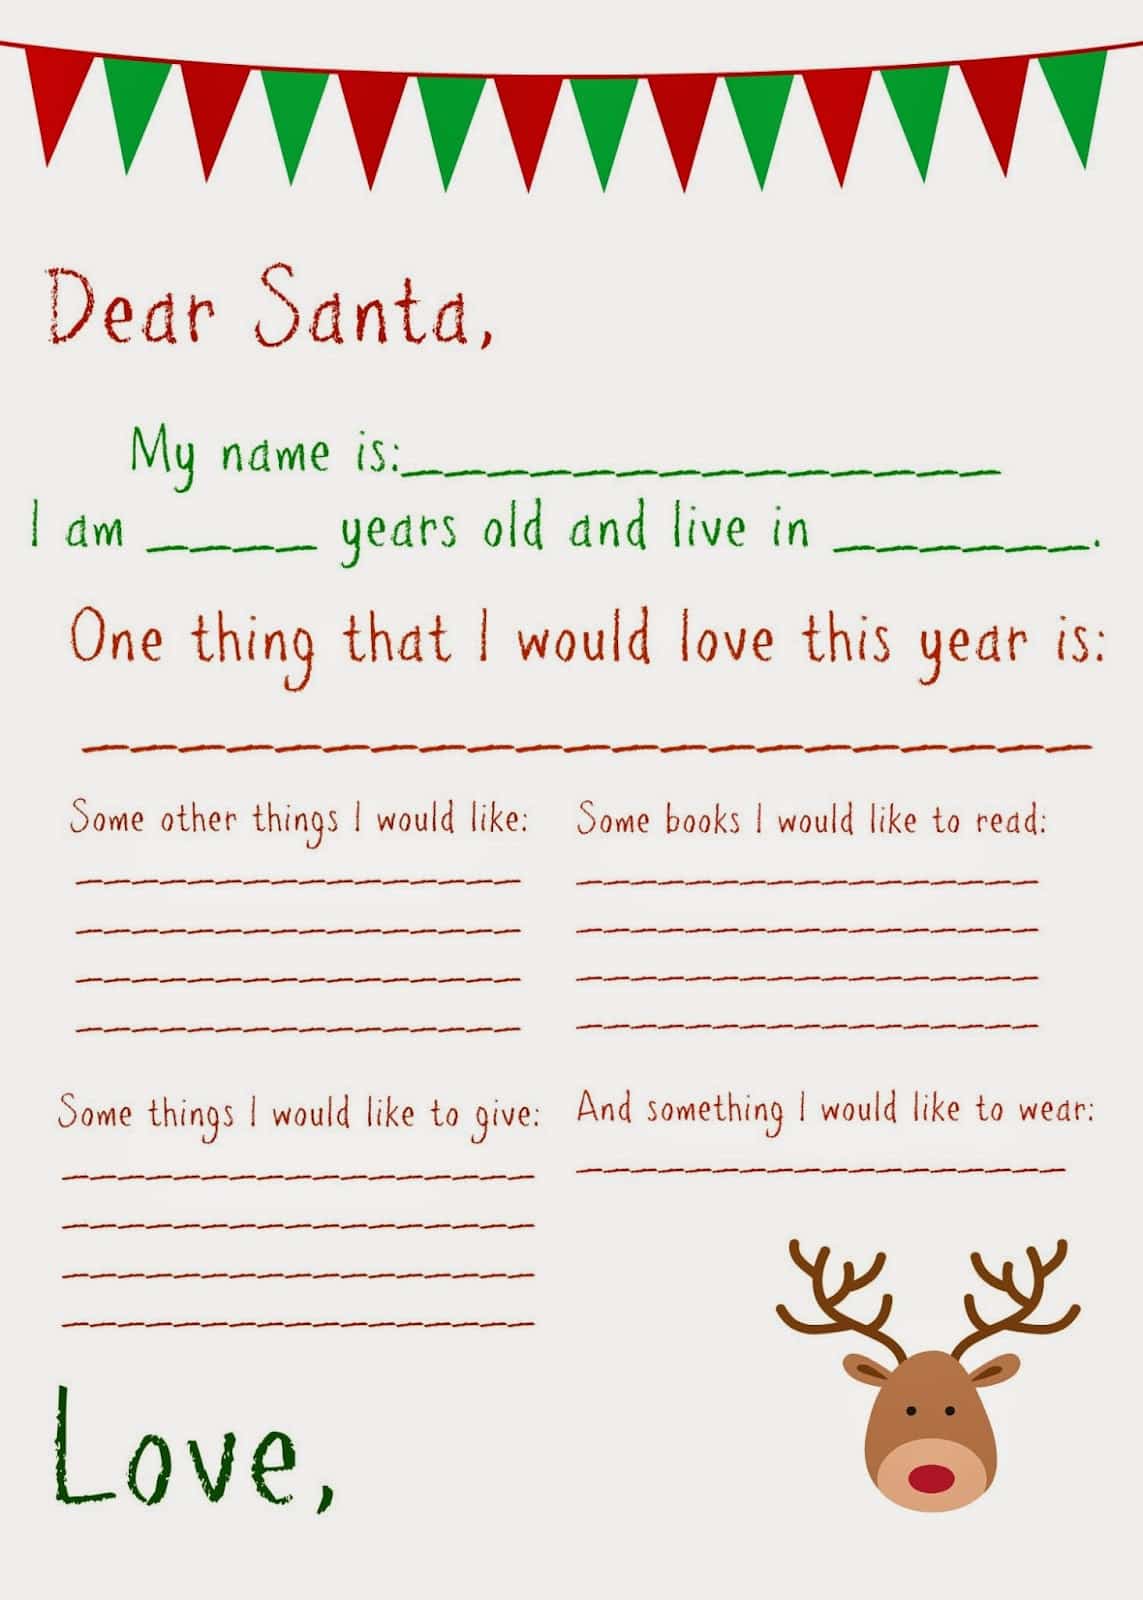 Dear Santa Letter (Free Printable) - The Chirping Moms Intended For Dear Santa Letter Template Free